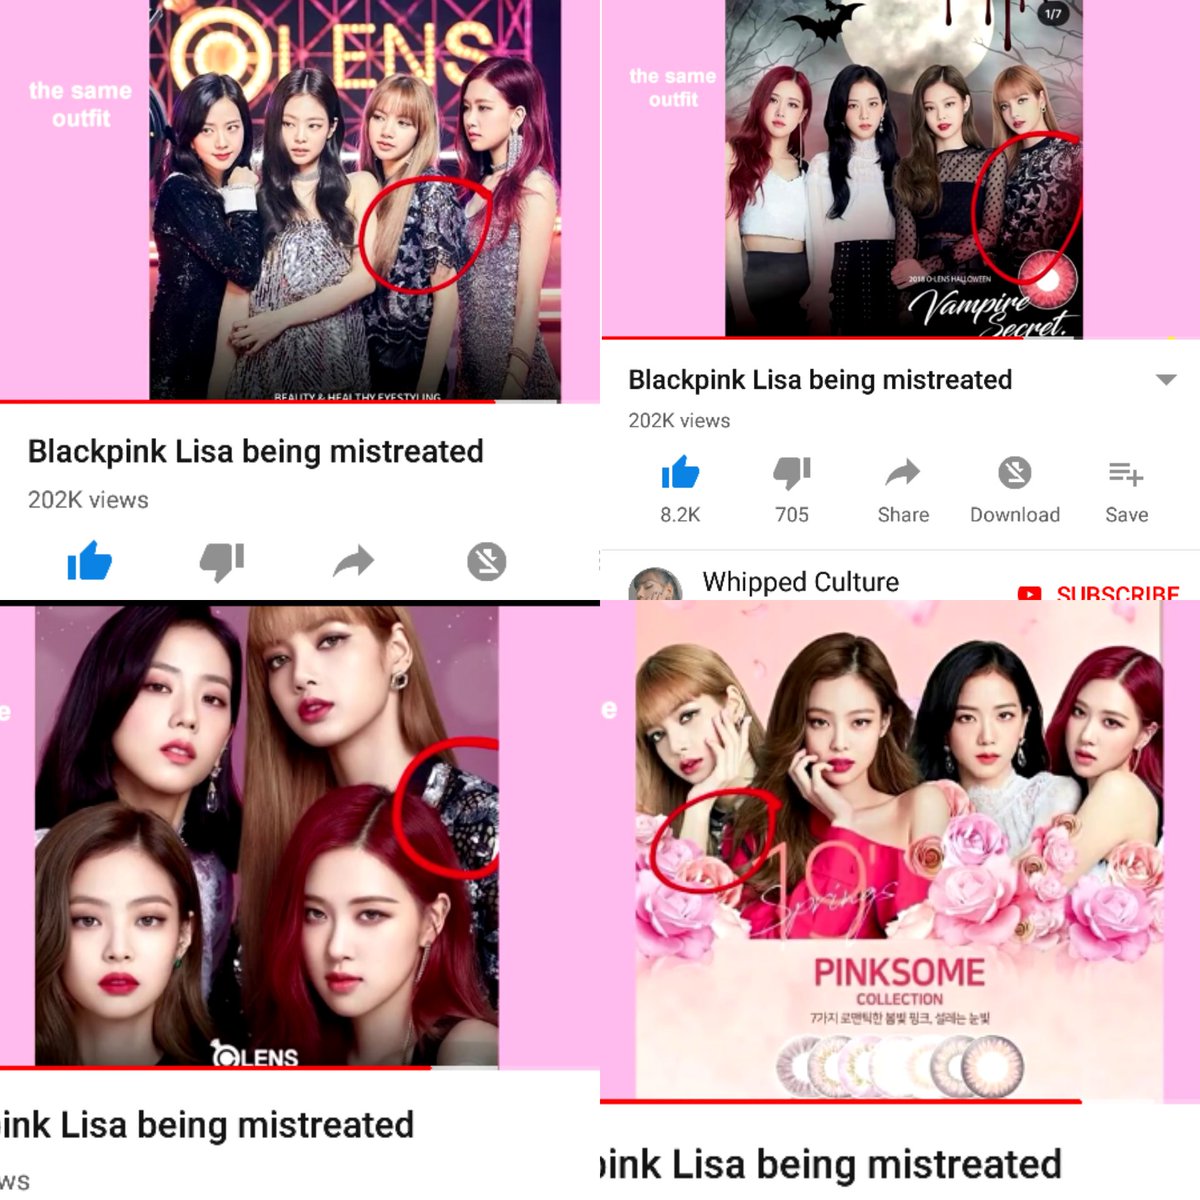 -Olens cropping Lisa out & writing in their caption jenchuchachaeng-olens following the chinese bar of all the members except lisa-Lisa the only member who didn't change outfit in all the ads of olens